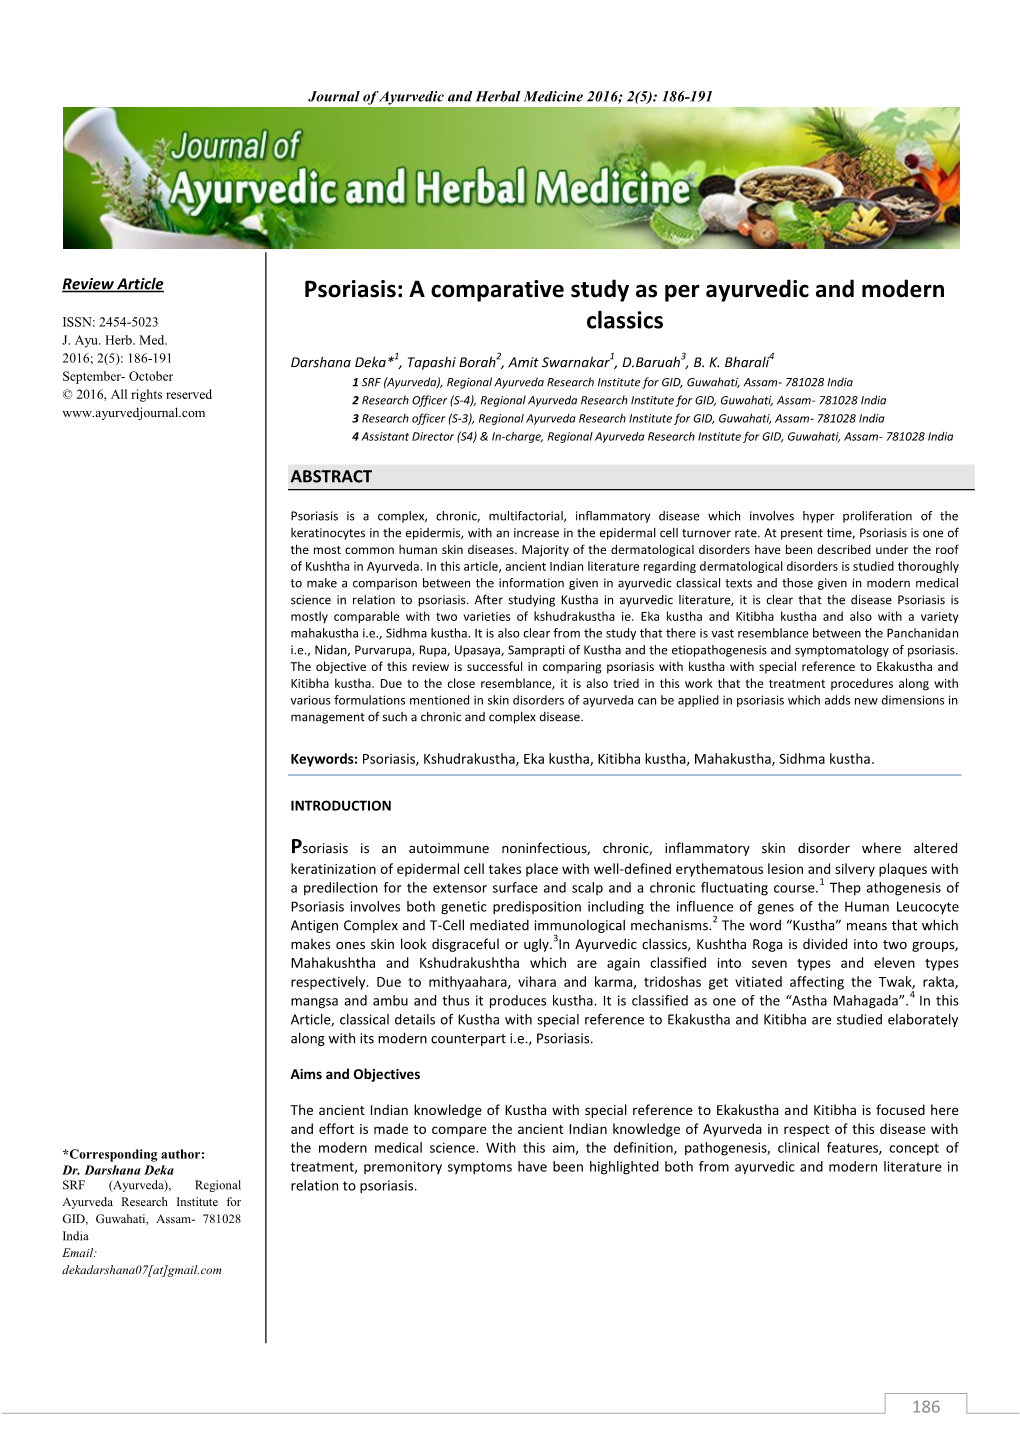 Psoriasis: a Comparative Study As Per Ayurvedic and Modern Classics